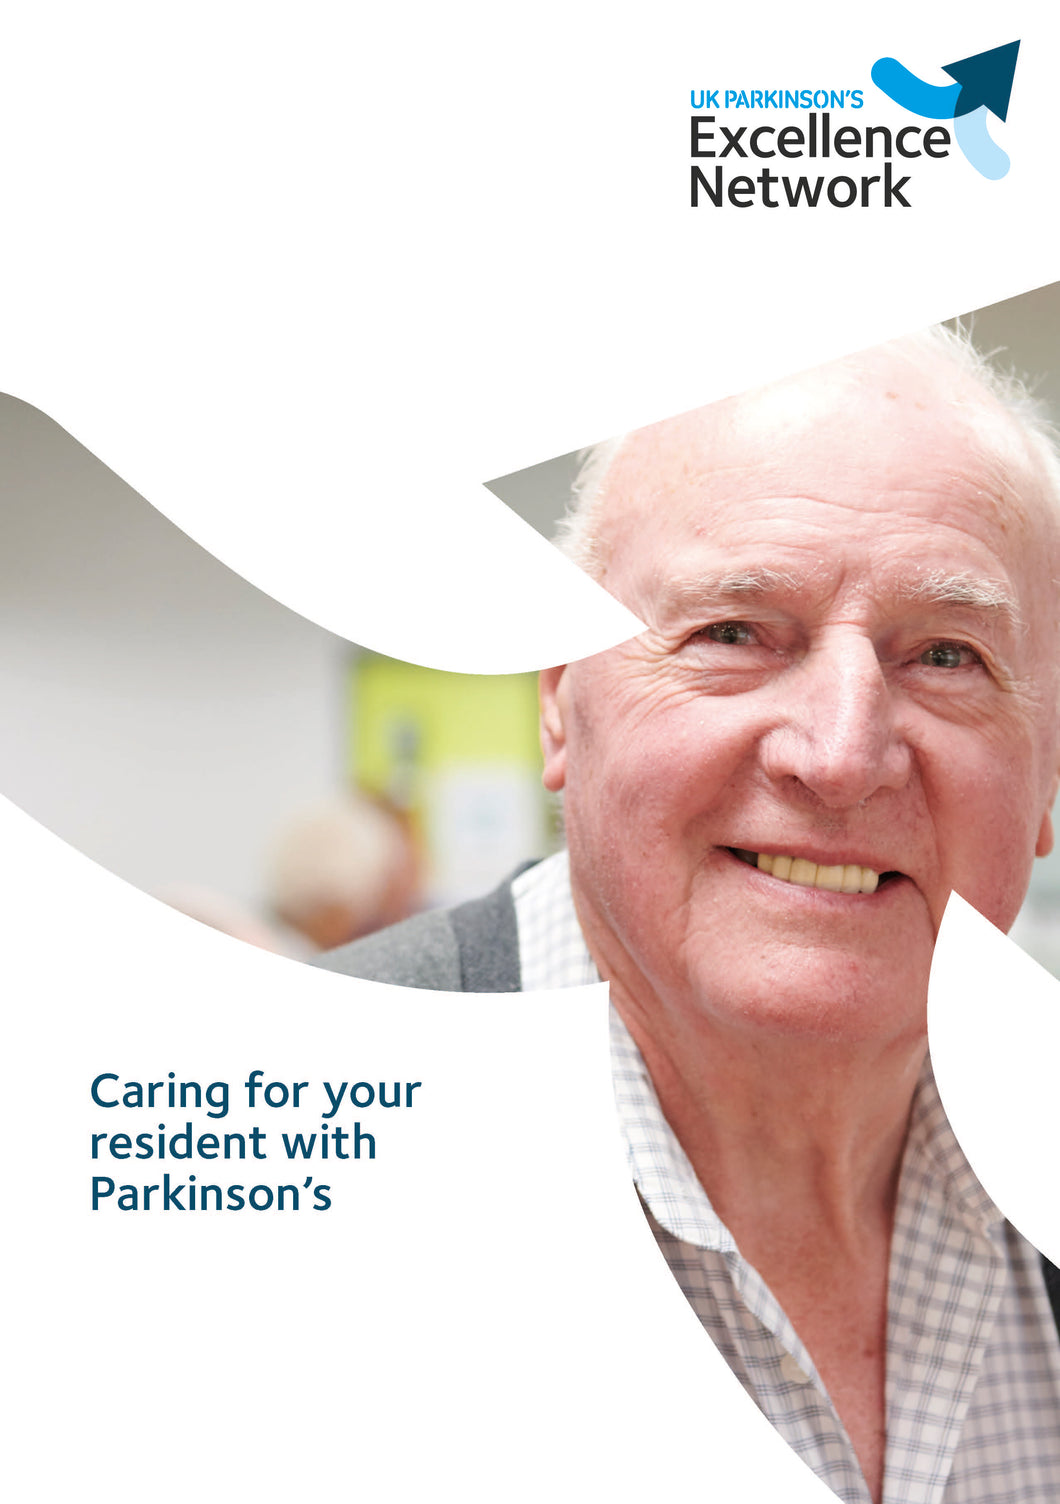 Caring for your resident with Parkinson’s